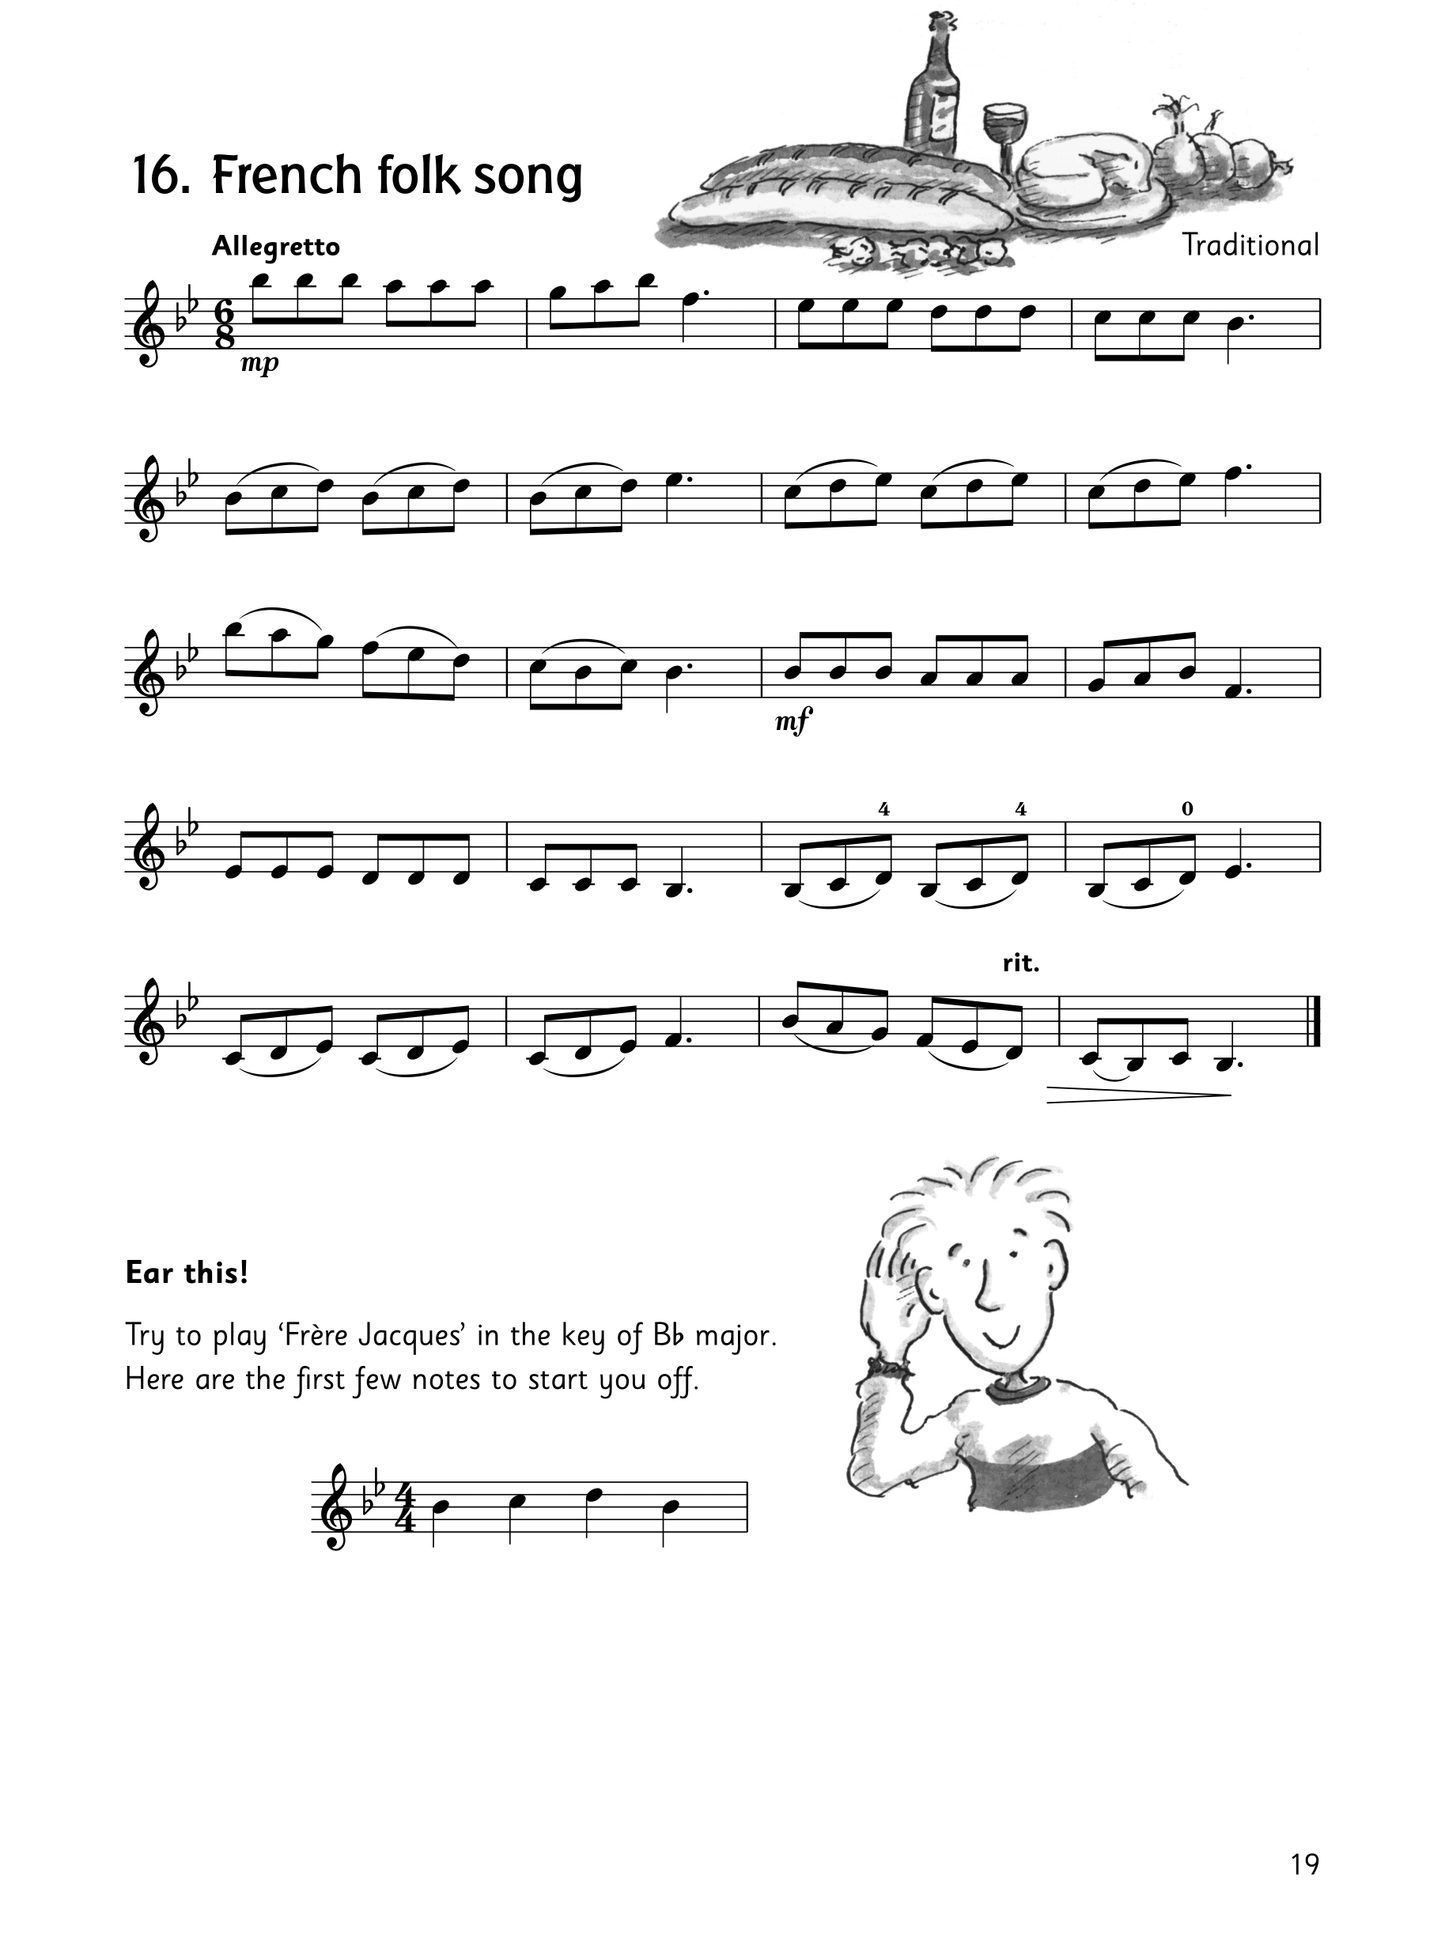 Fiddle Time Student Pack - Starter Pack for Violin Players (Book and Resources)